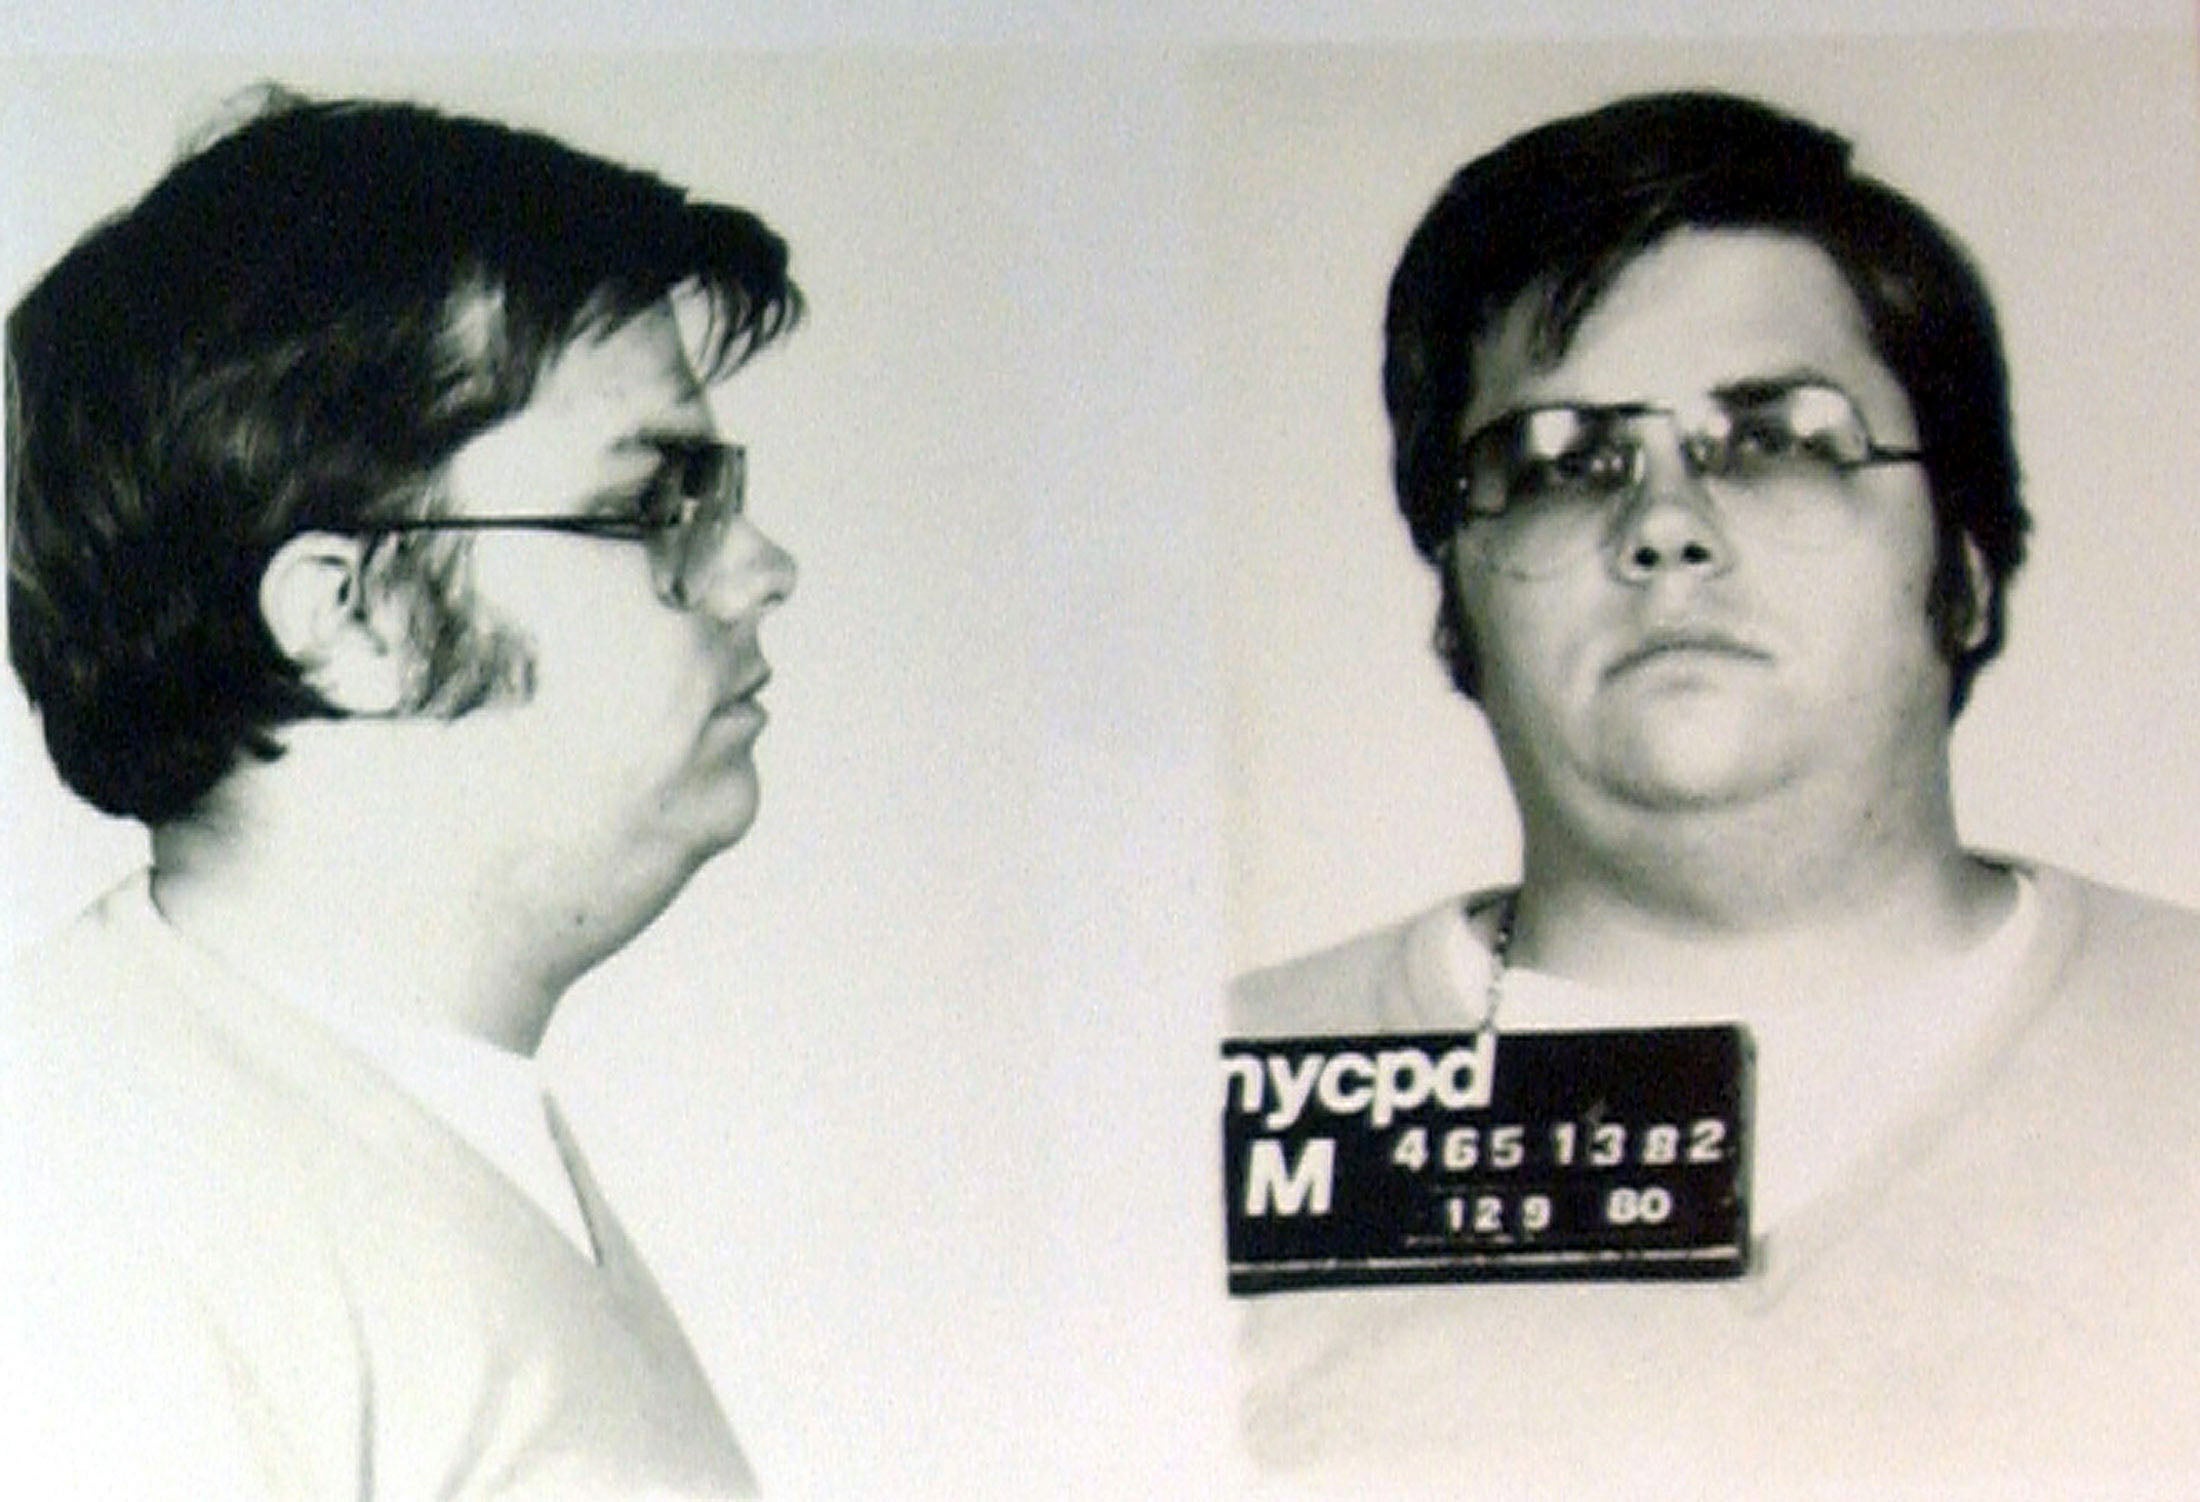 A mugshot of Chapman after he was jailed for 20 years to life for John Lennon's murder in December 1980